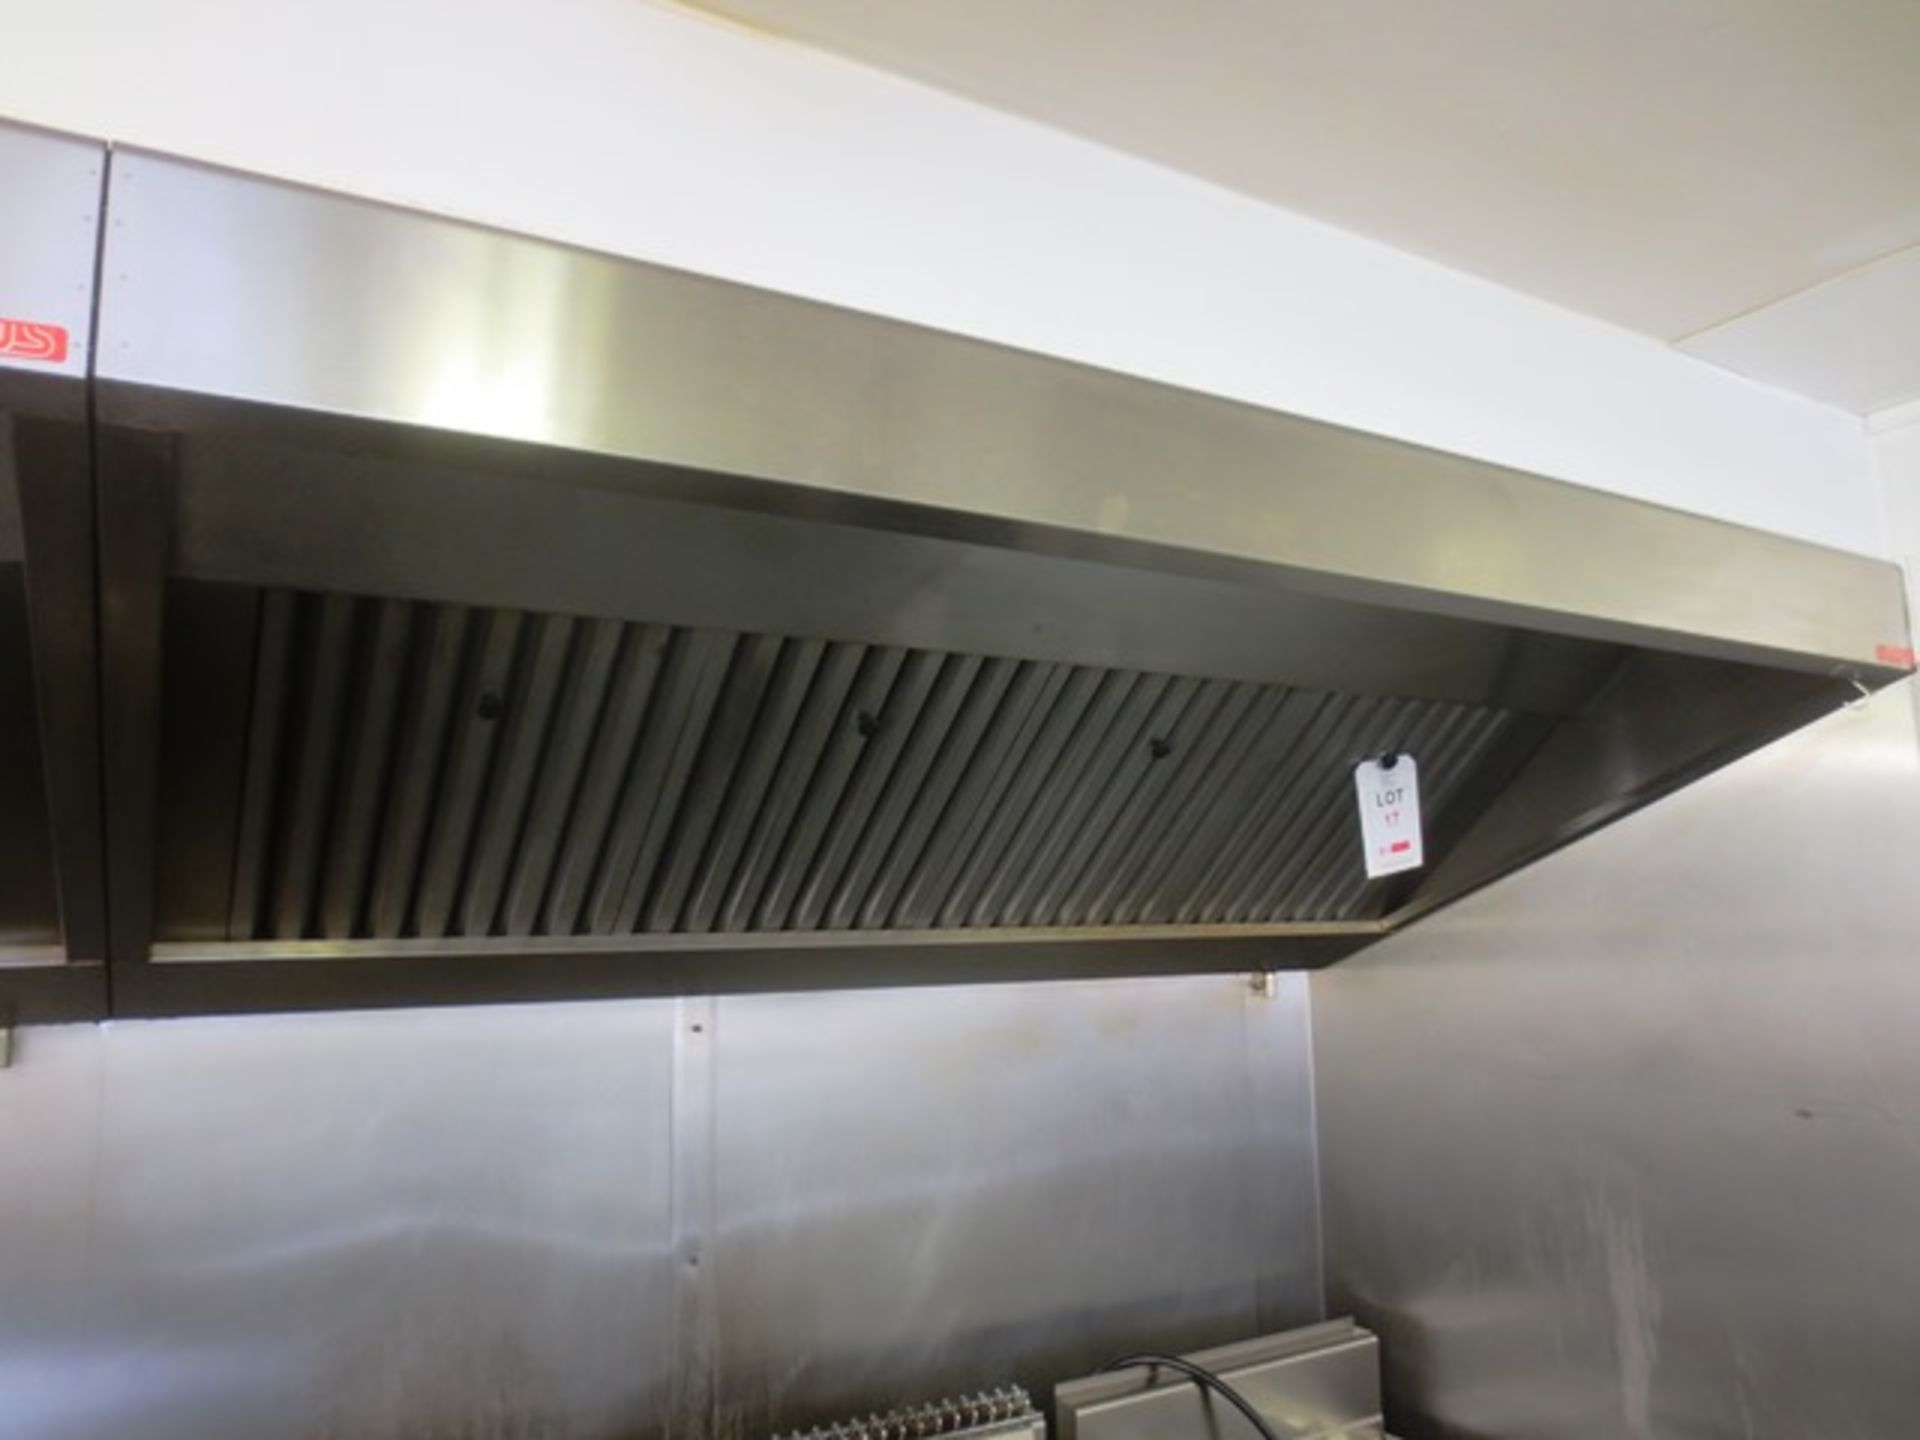 Lotus stainless steel extraction hood, approx dimensions: 1770mm width (Please note: Purchaser